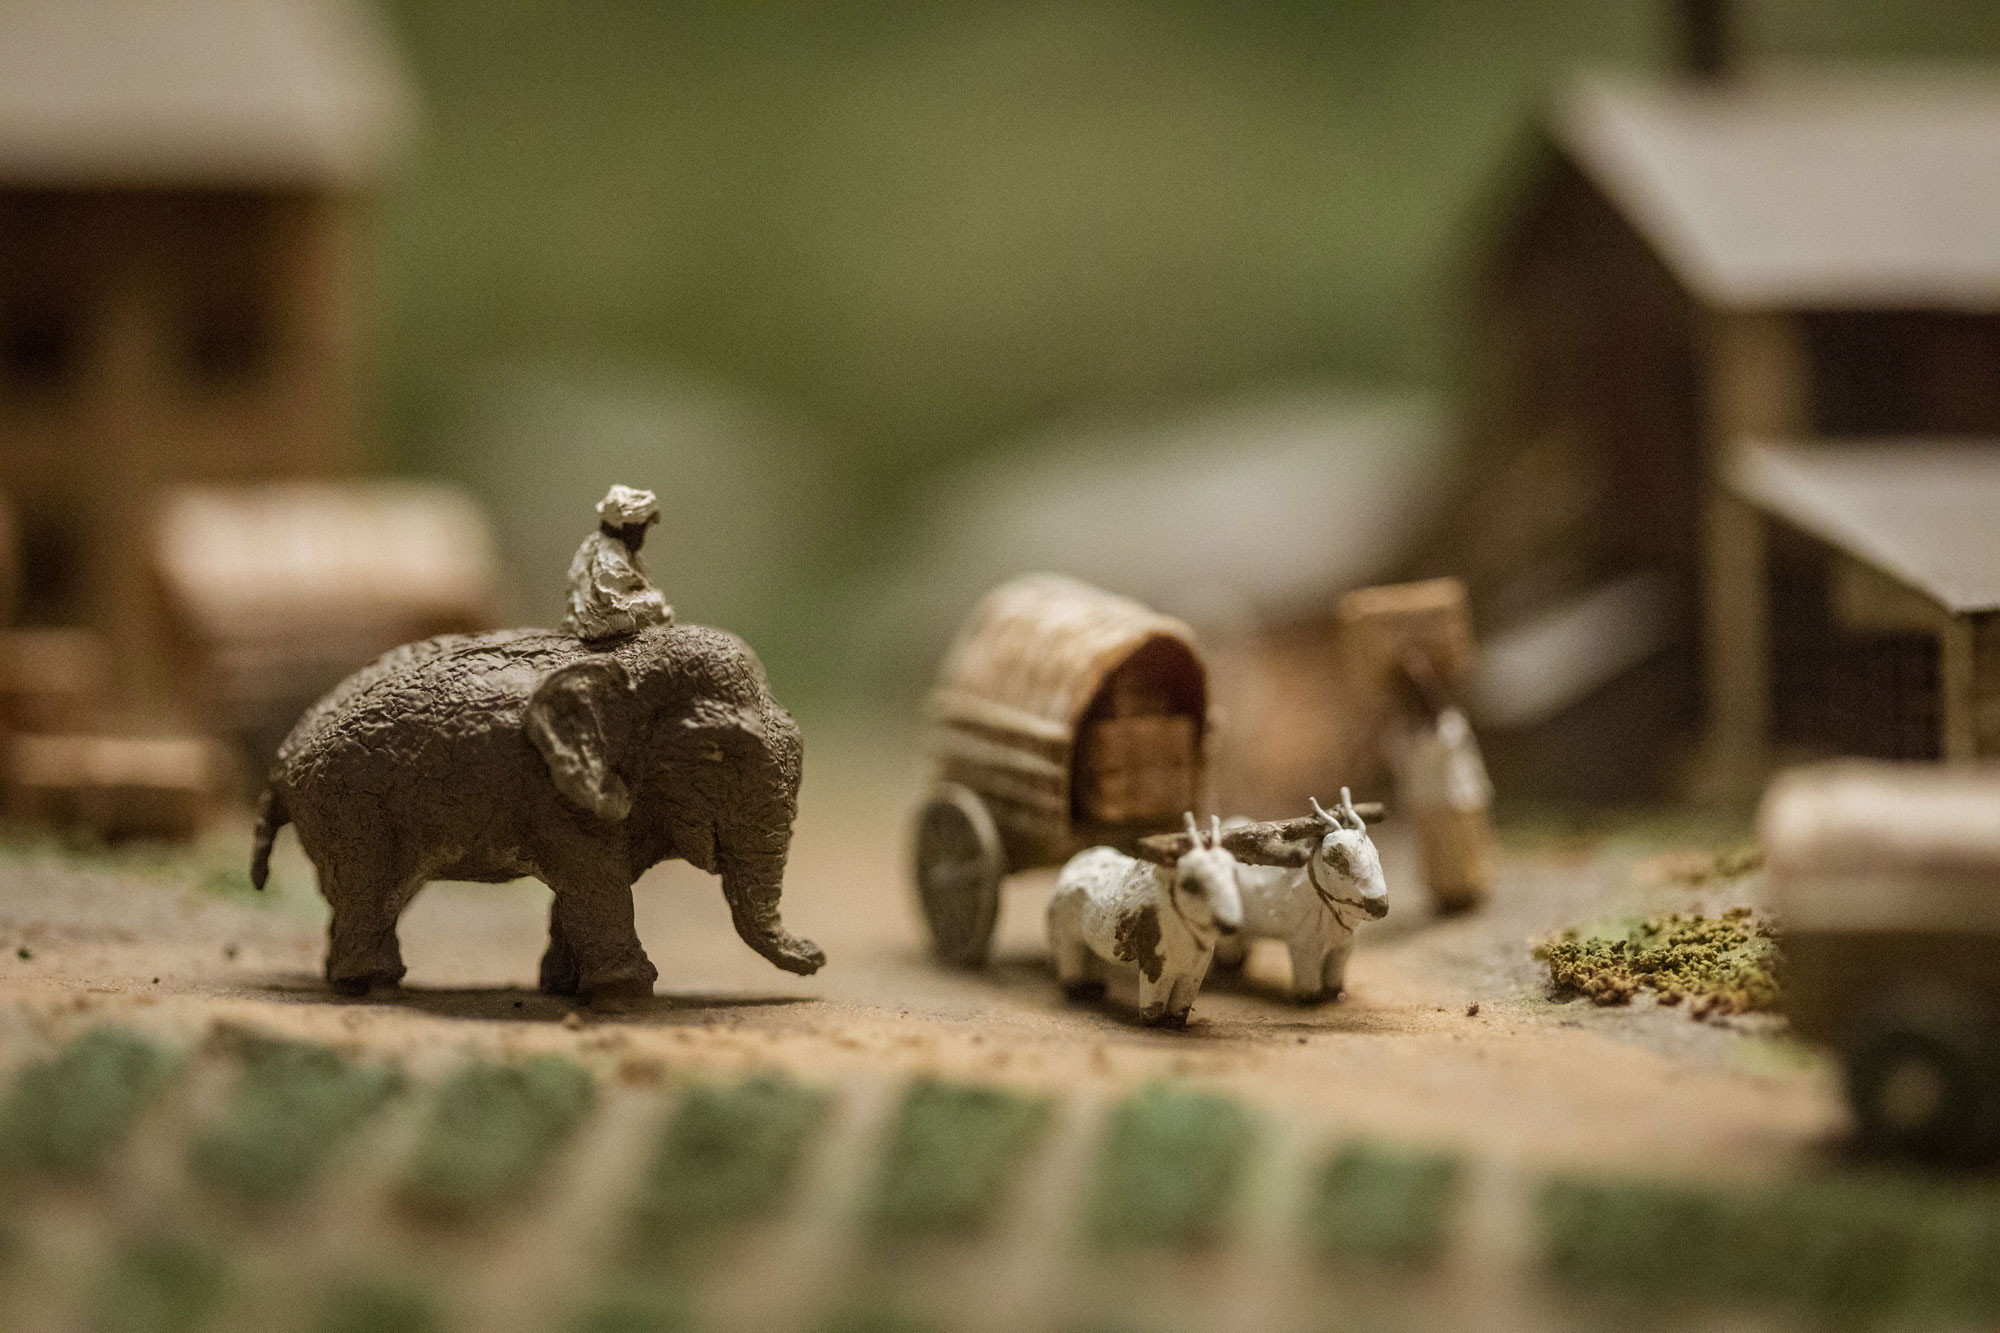 Close-up view of a diorama featuring a man riding an elephant and two goats pulling a wagon.